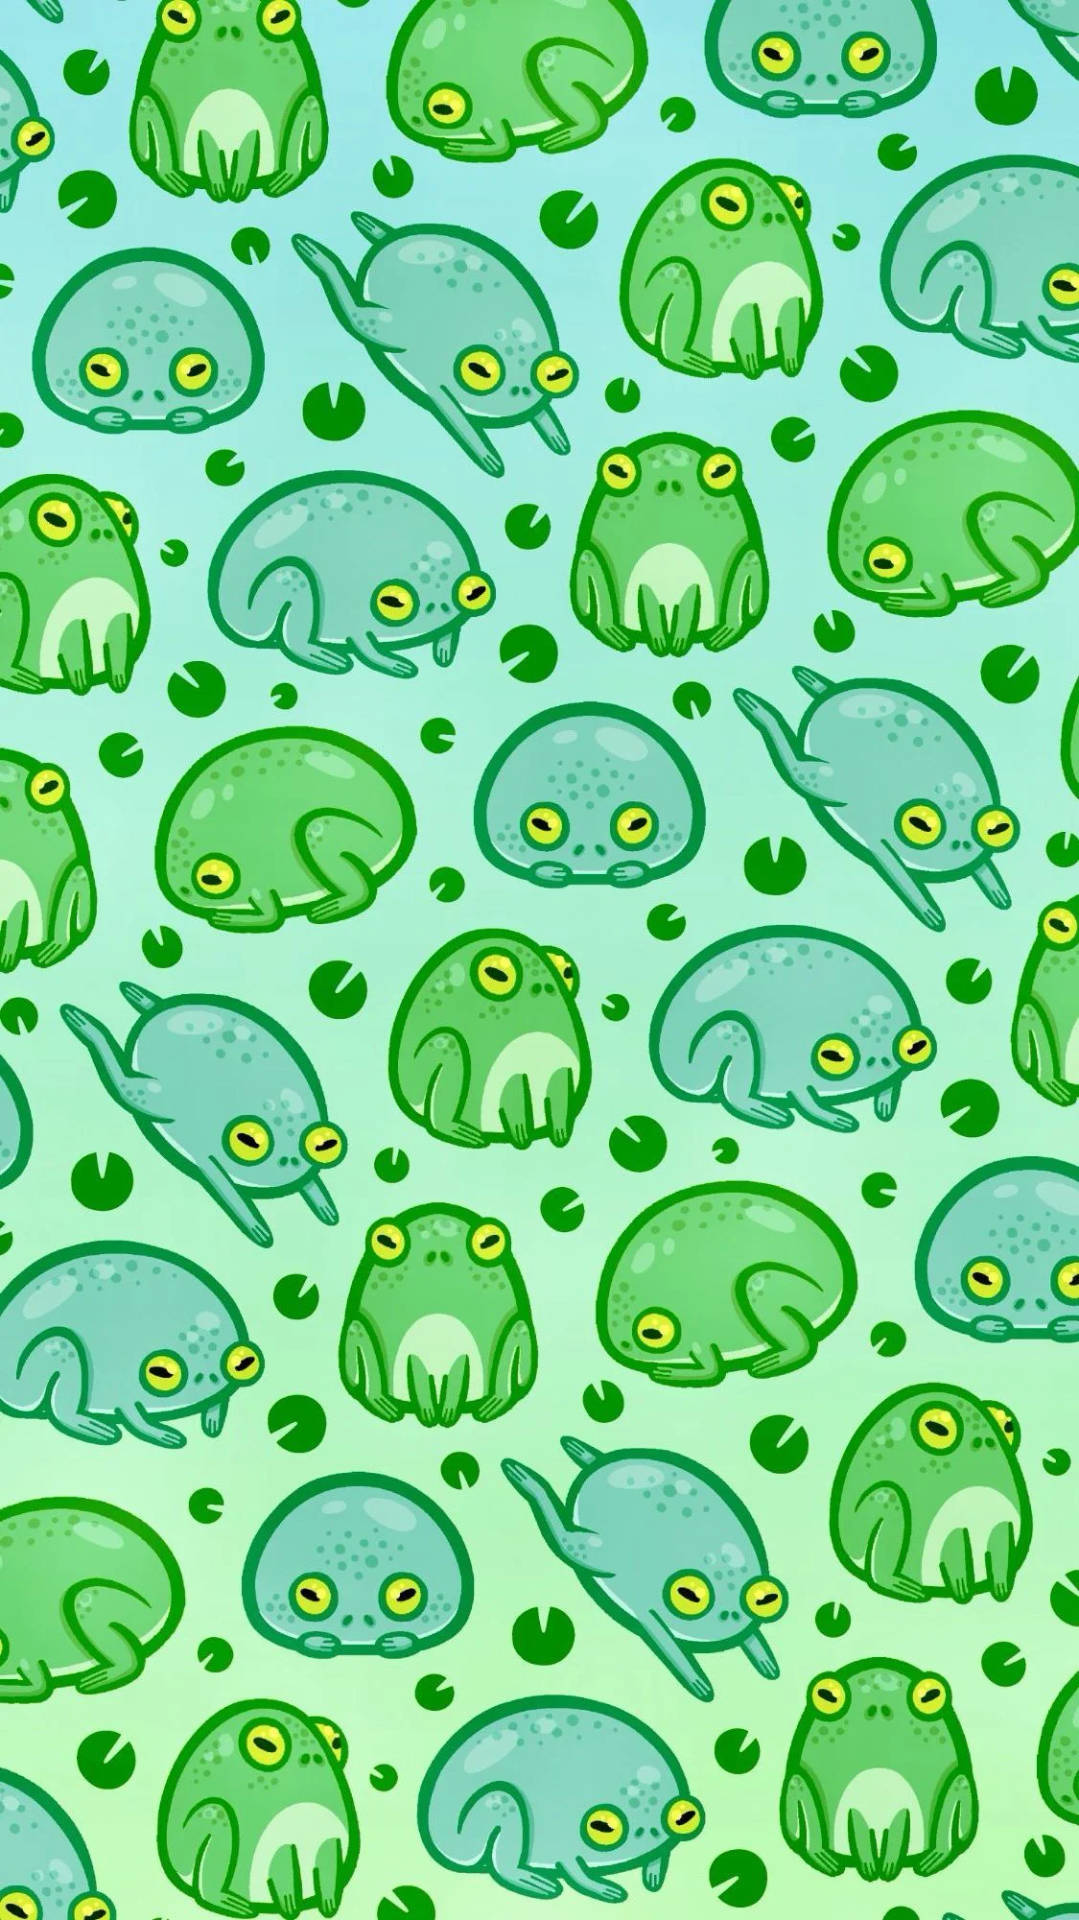 Rounded Kawaii Frog In Pattern